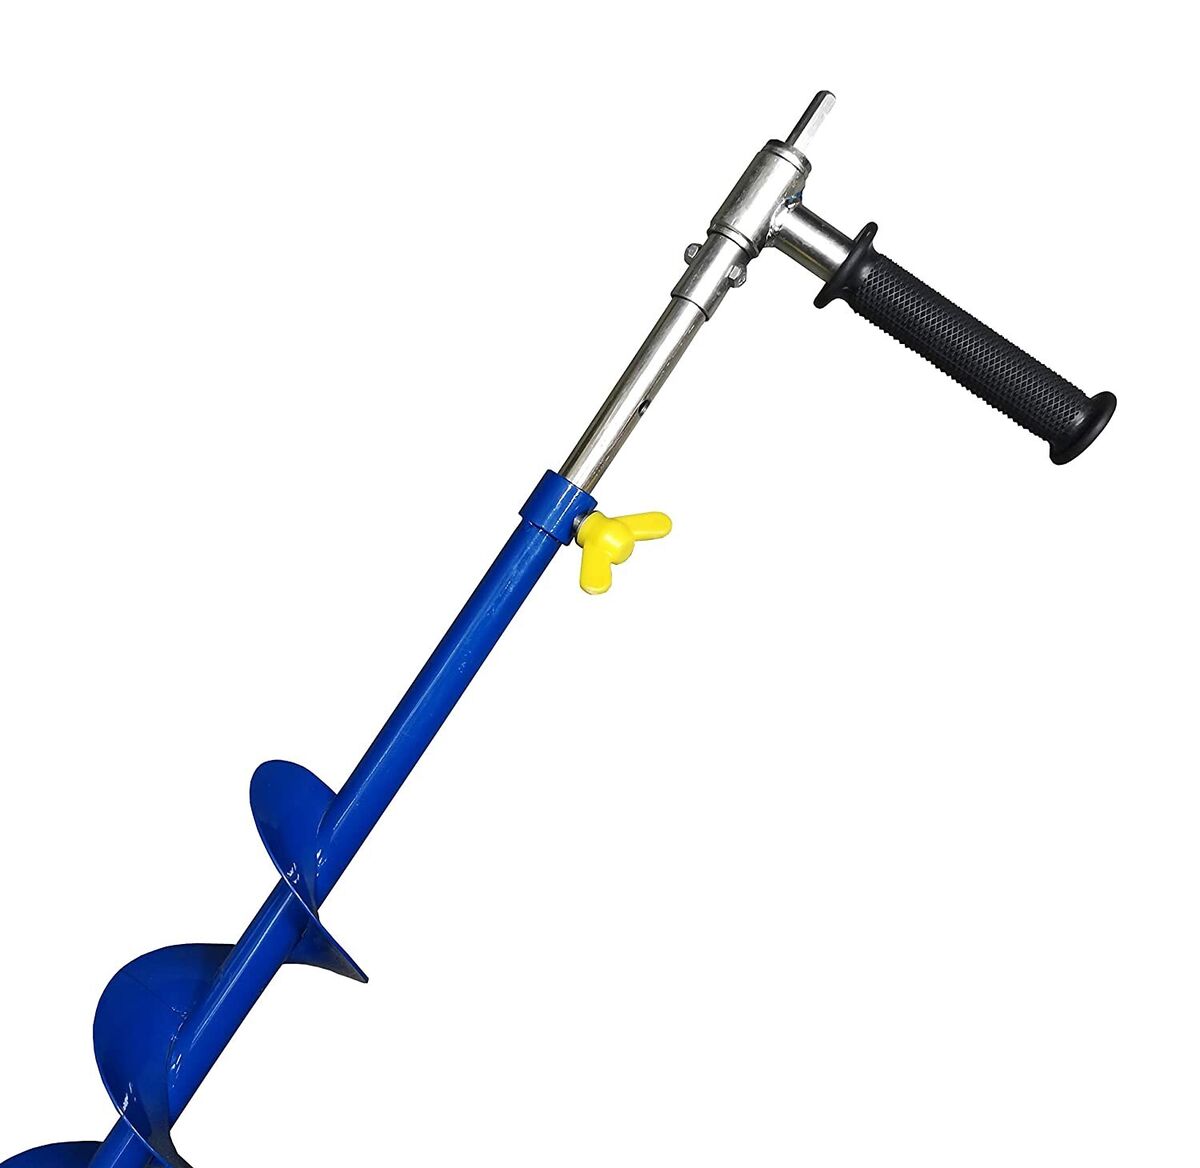 Ice Auger Drill Adapter with Handle - 18mm/0.720 Output Shaft Diameter